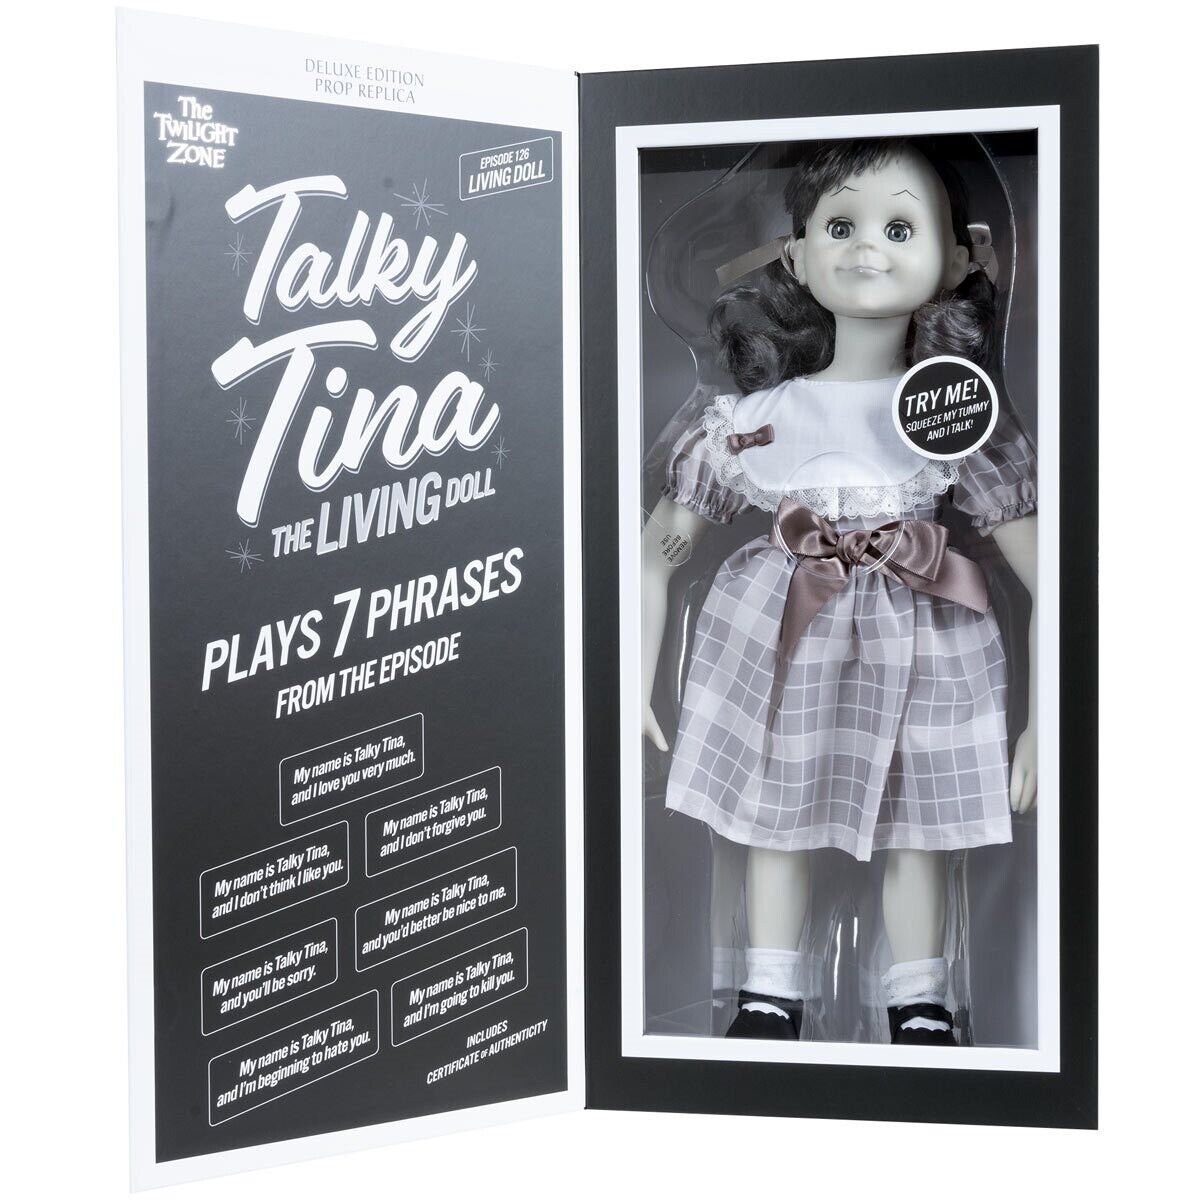 The Twilight Zone Talky Tina 18-Inch Prop Replica Doll Limited Edition 520/ 1004